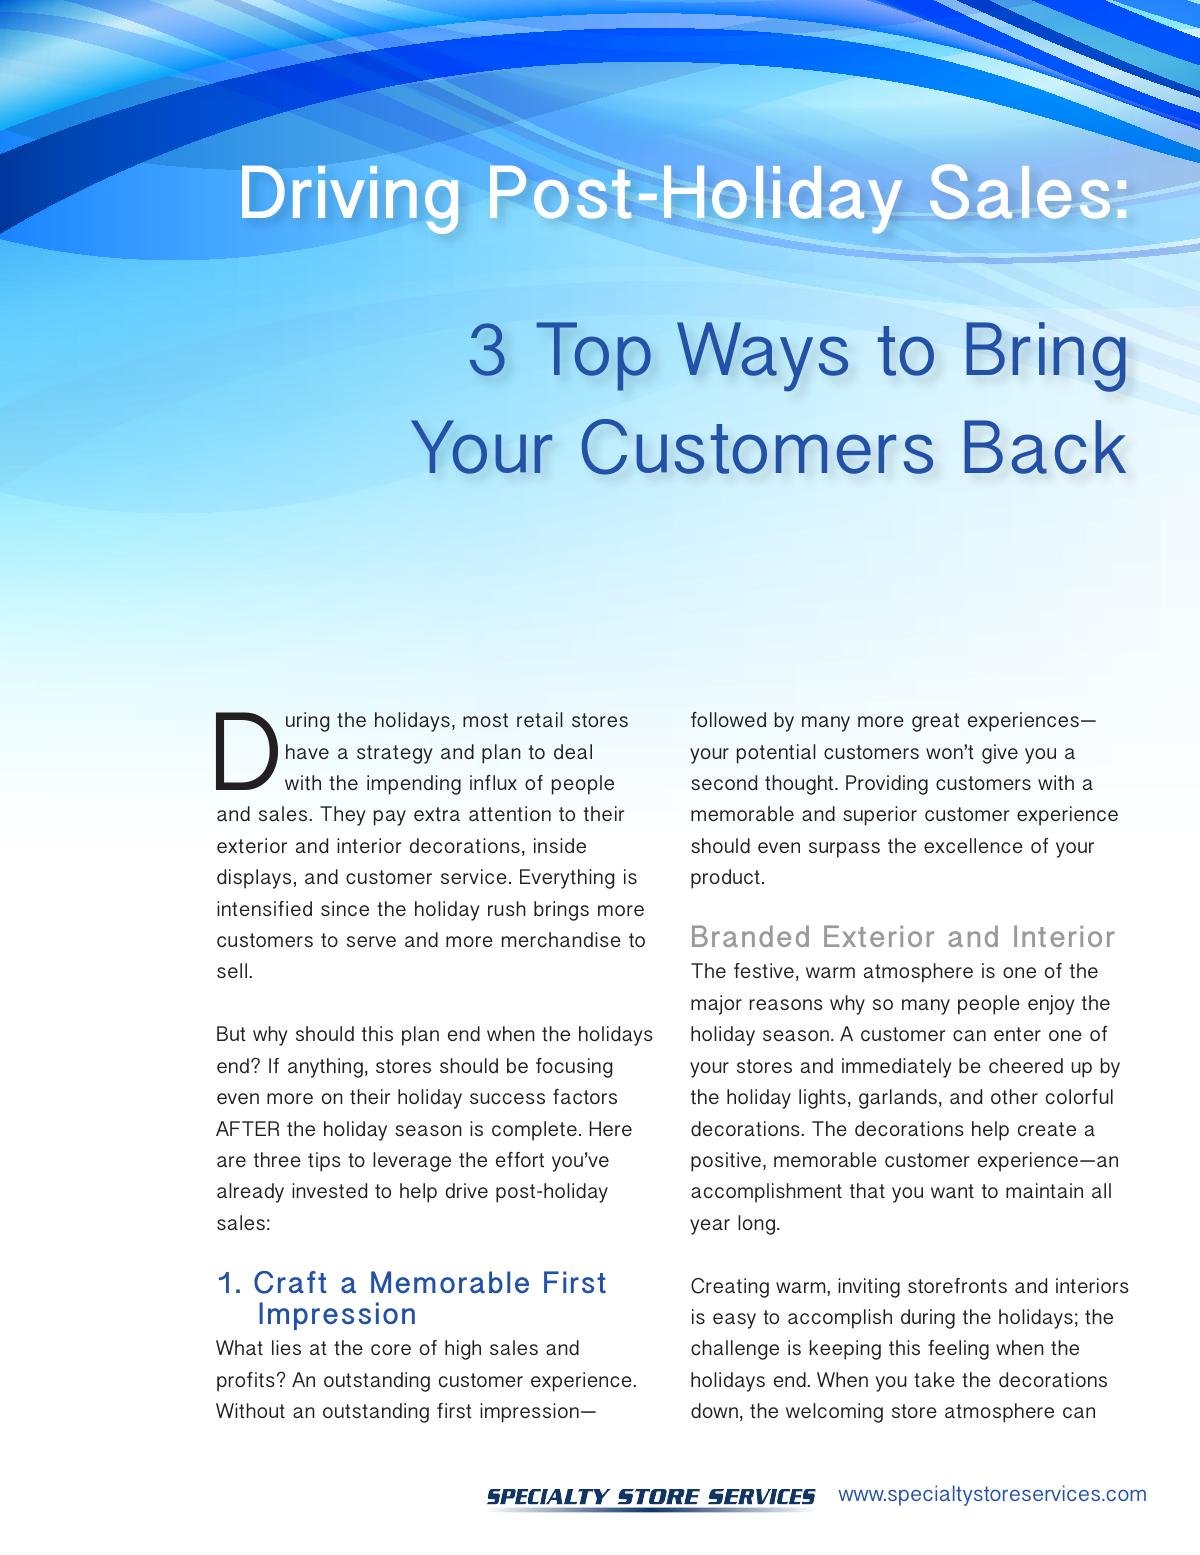 Top 3 Ways to Drive Post-Holiday Sales